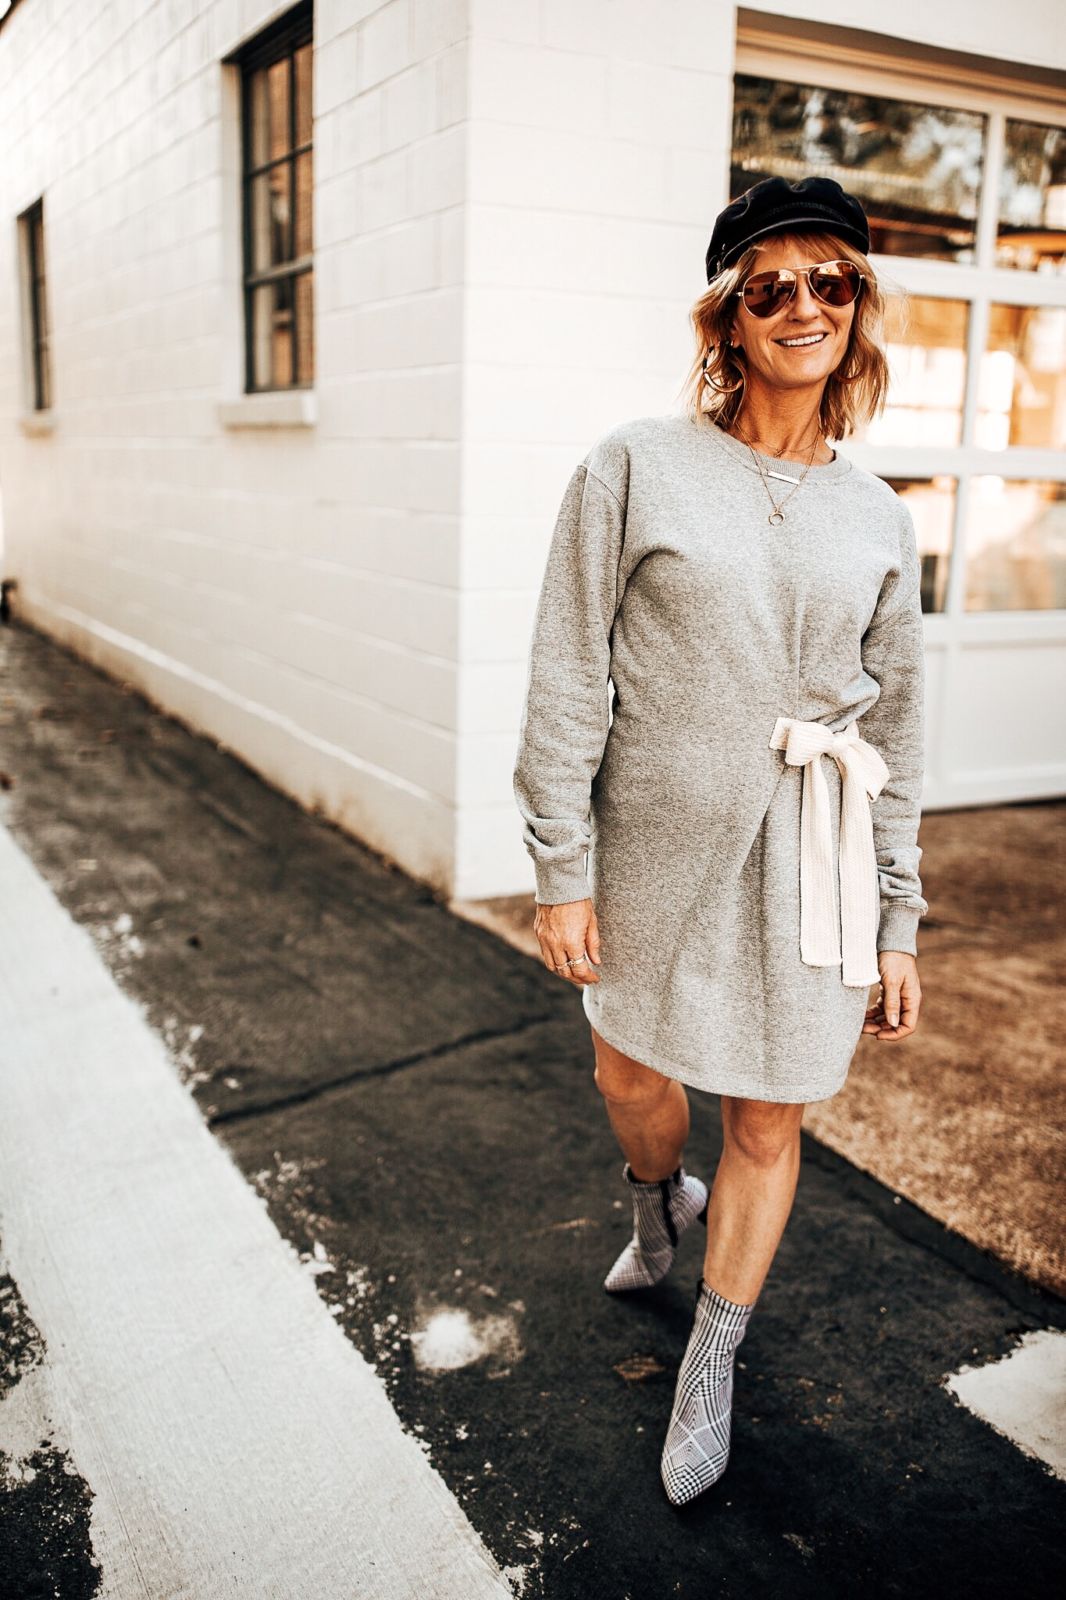 baker boy hat | dress | styled with boots | oh darling blog